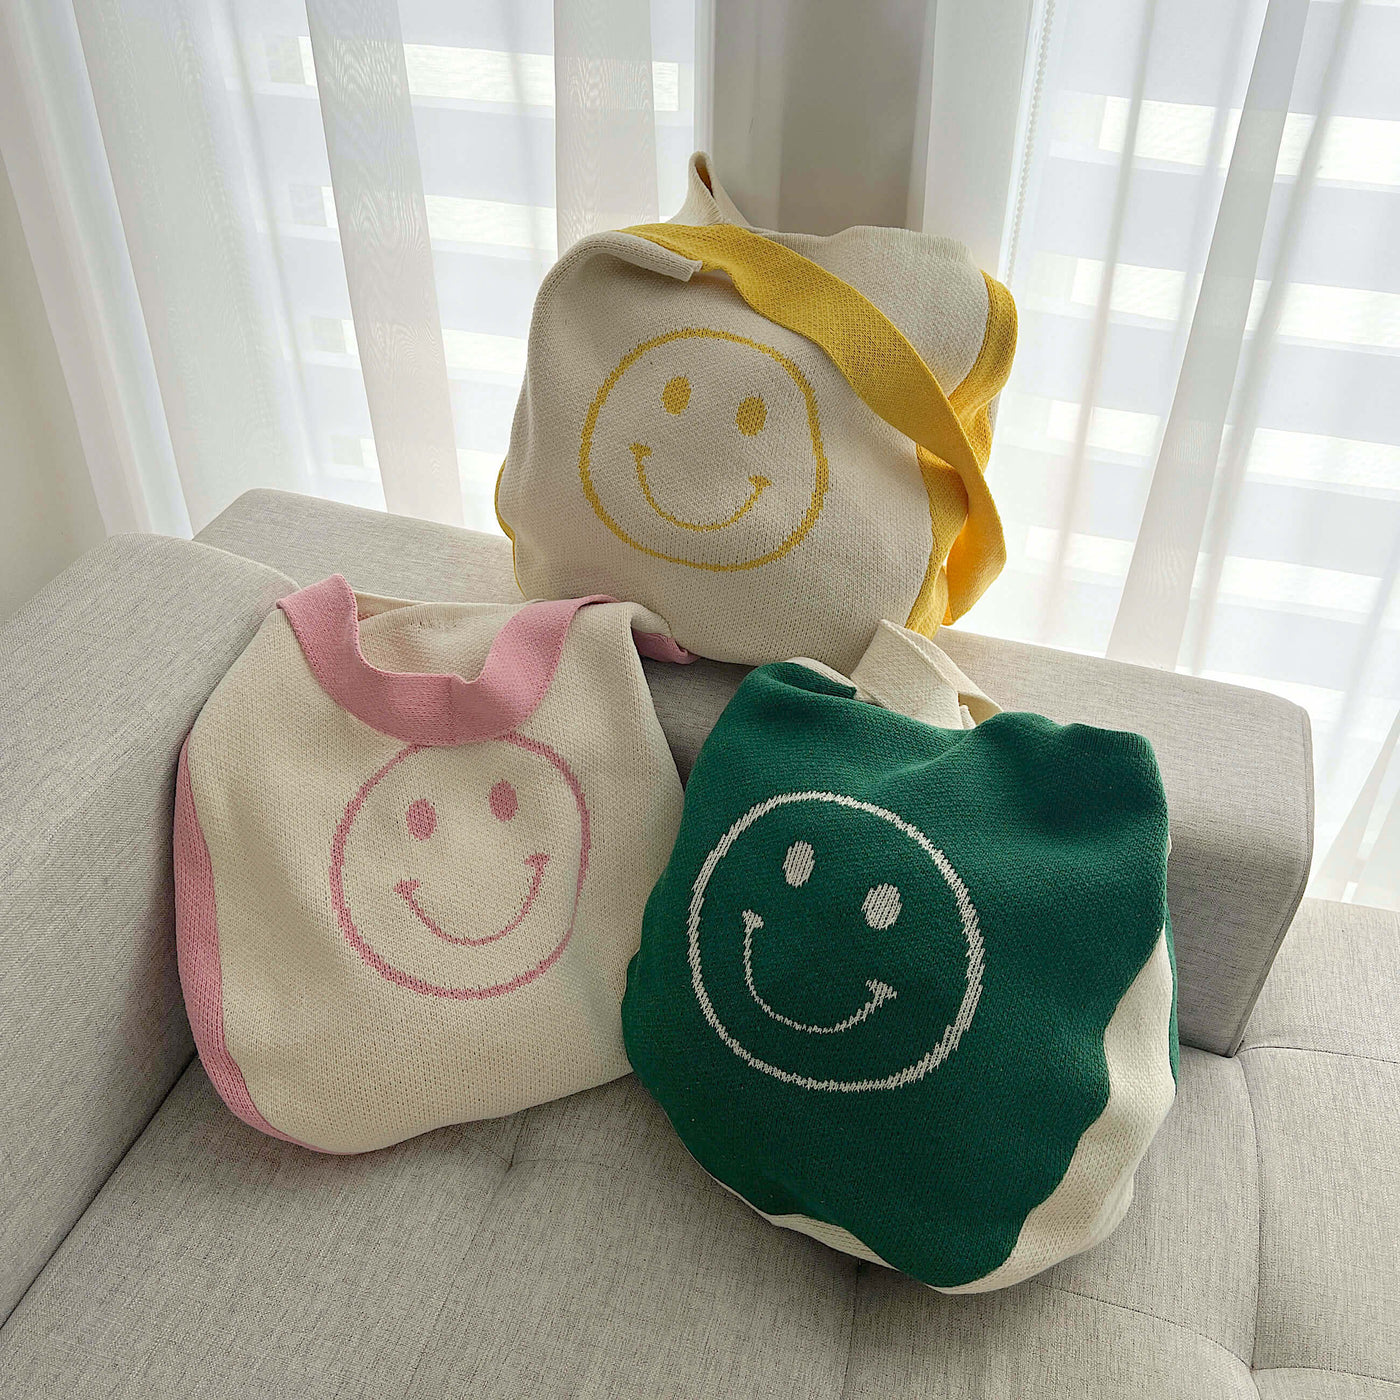 Smiley Face Knit Tote Bag